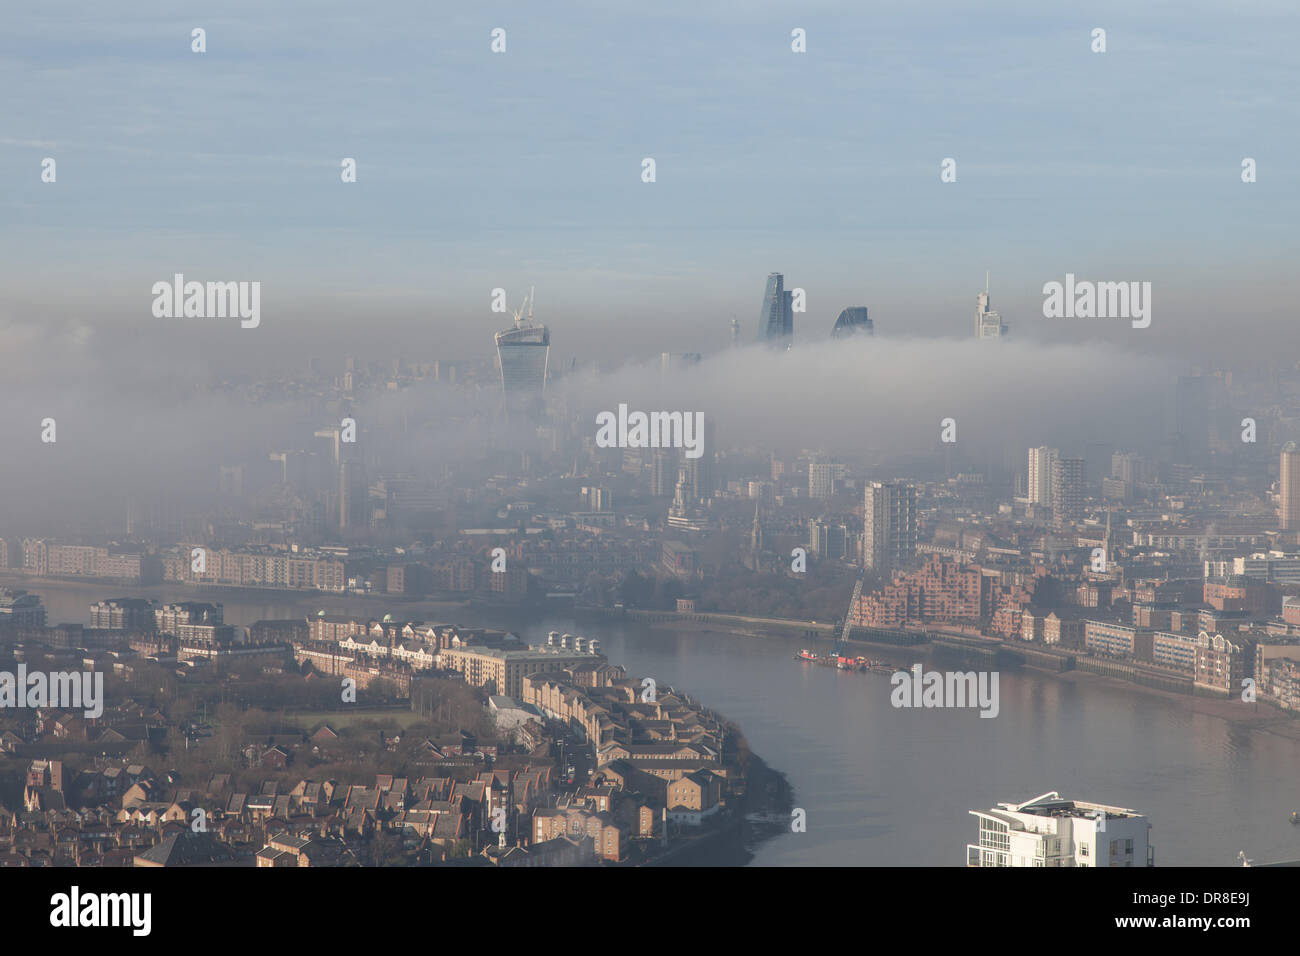 London UK, 21st Jan 2014. A bank of low fog shrouds the City of London and surrounding areas. The tops of some of London's tallest buildings are visible above the fog. This shot was taken from Canary Wharf. © Steve Bright/Alamy Live News Credit:  Steve Bright/Alamy Live News Stock Photo